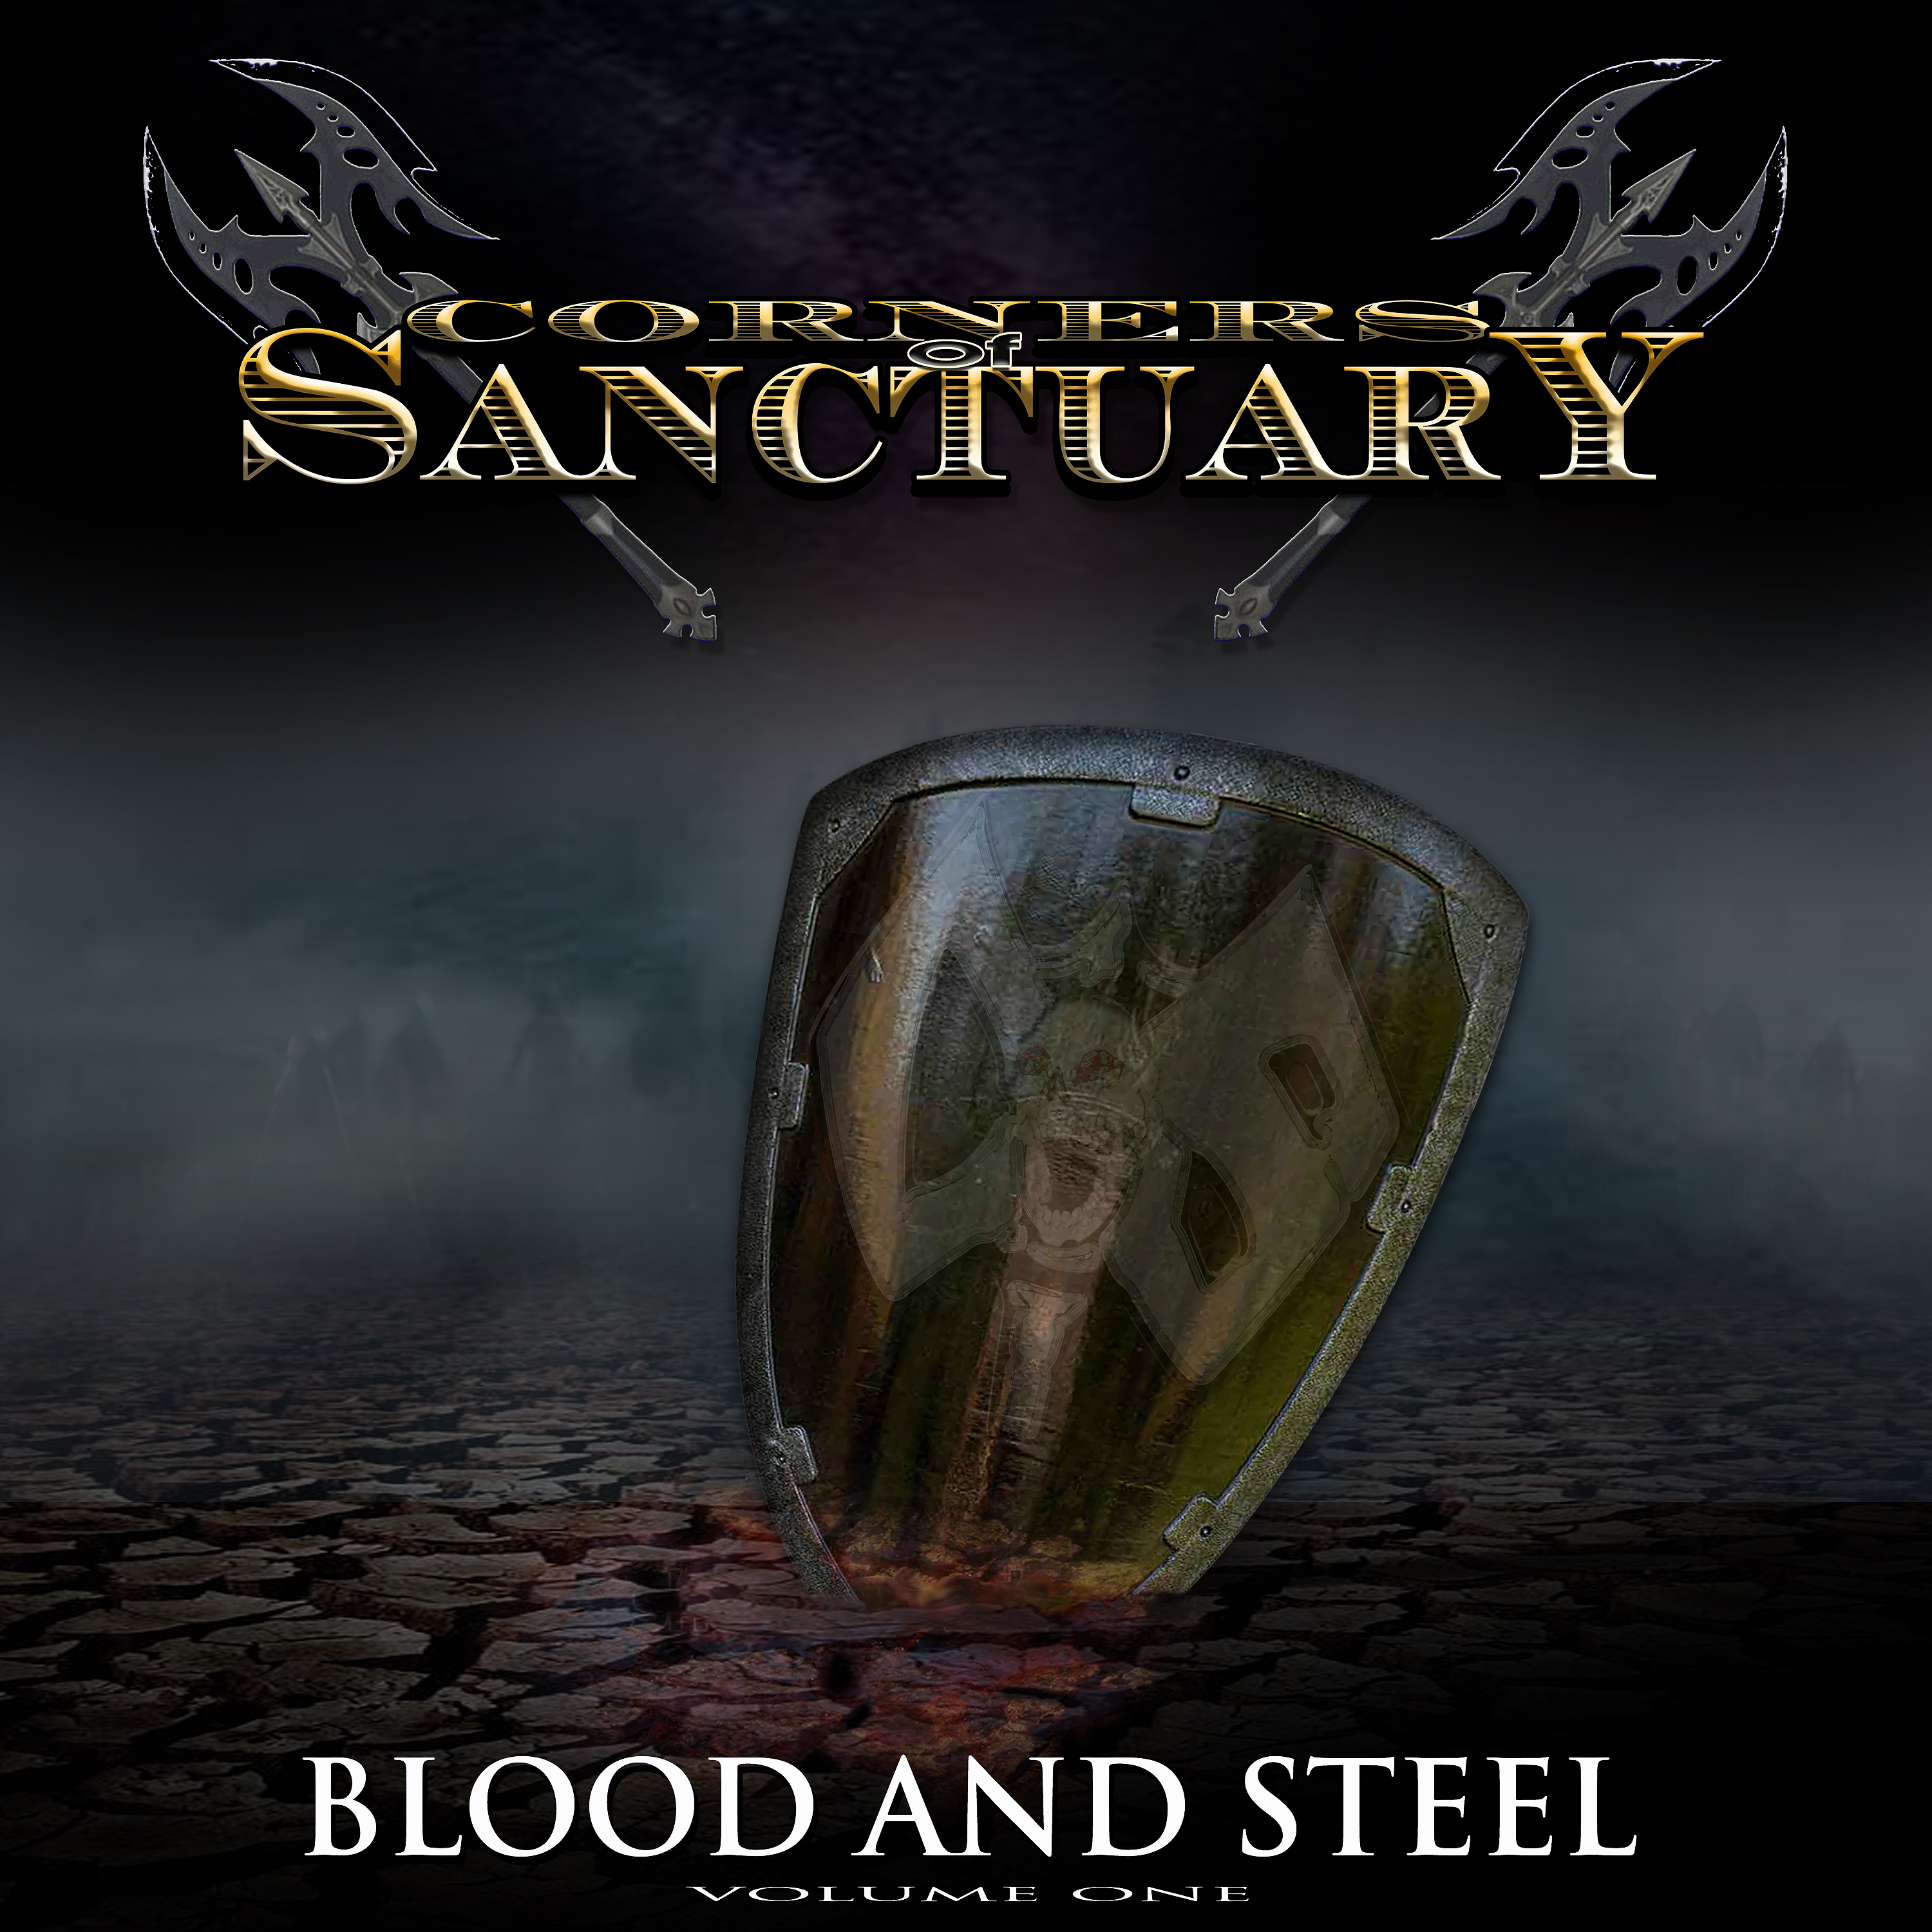 Corners of Sanctuary Blood and Steel volume I EP cover art Jan 2021